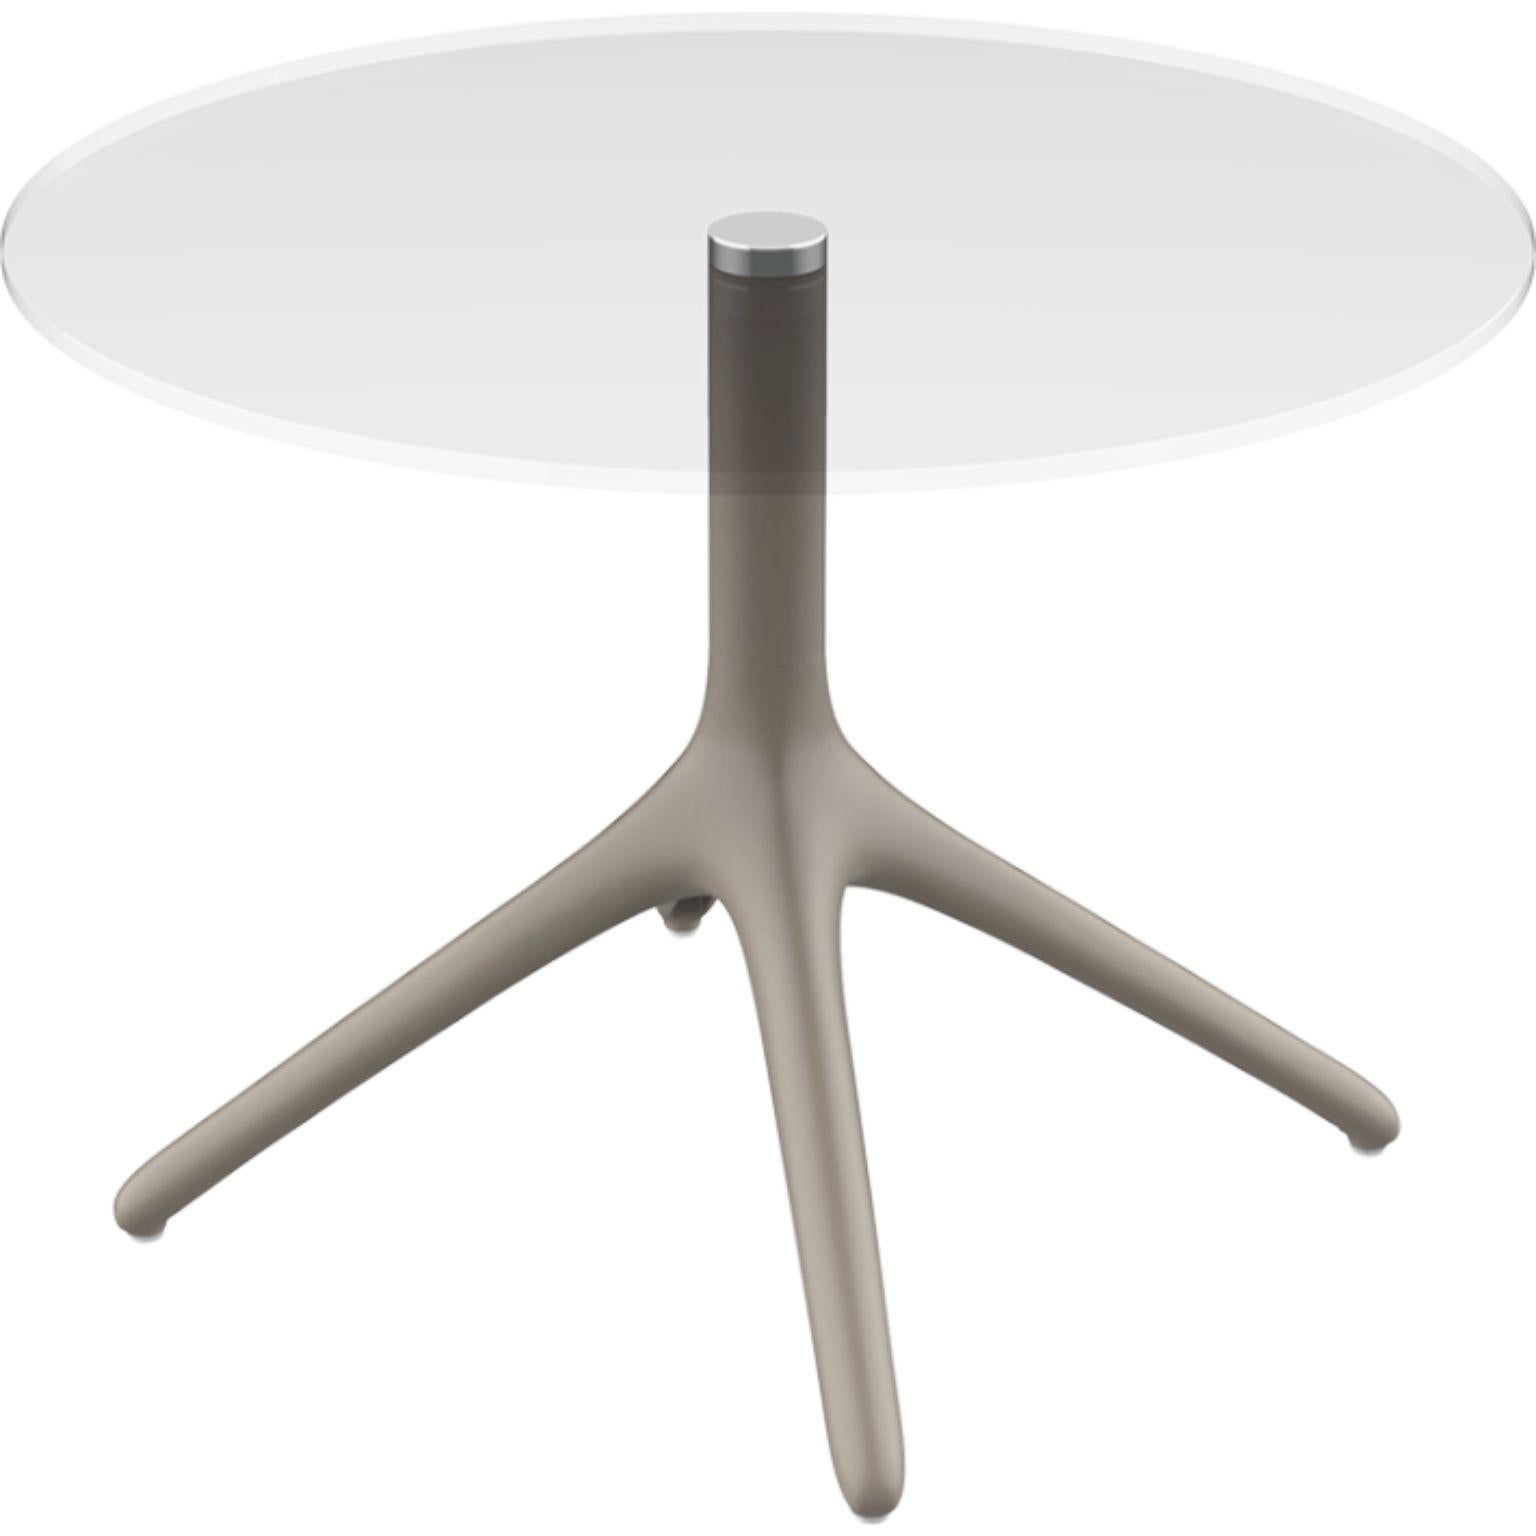 Spanish Uni Black Table 50 by Mowee For Sale